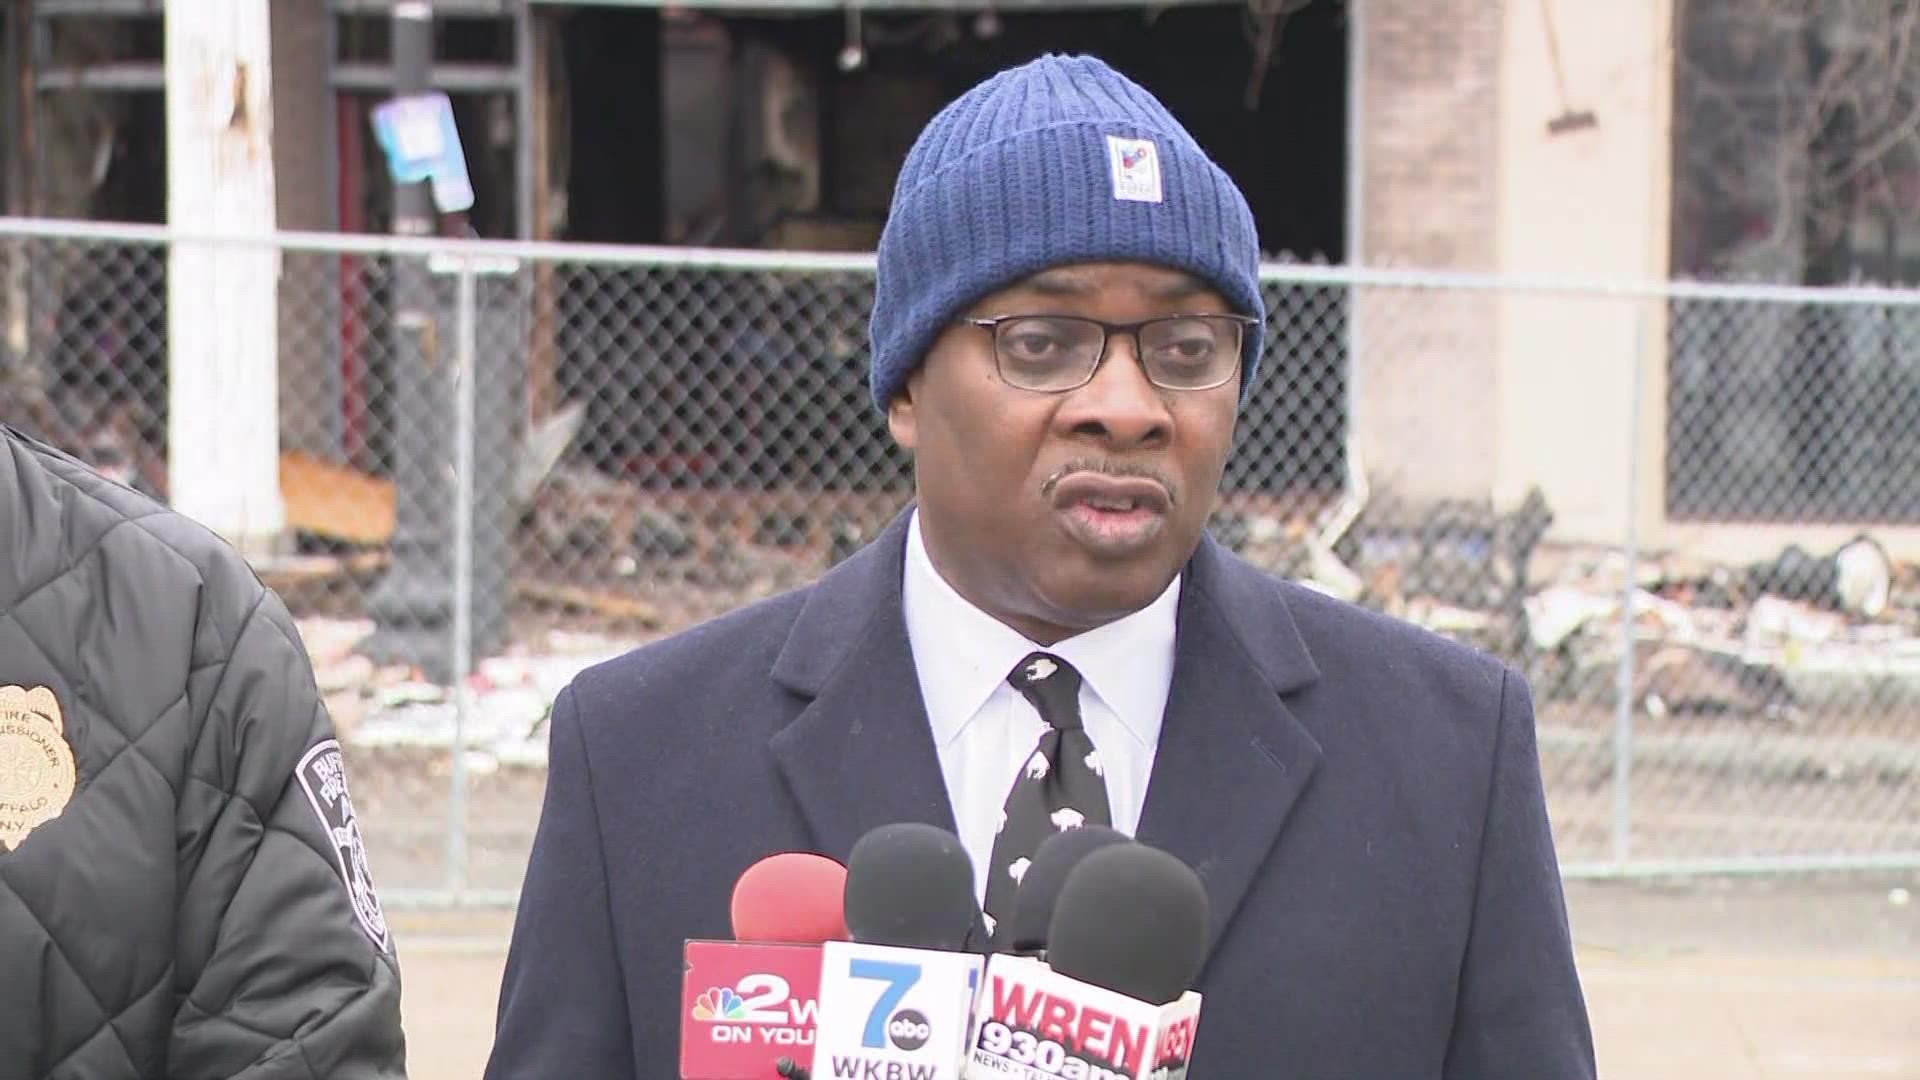 An update on the downtown Buffalo fatal fire investigation was provided on Saturday, March 4, by city officials.